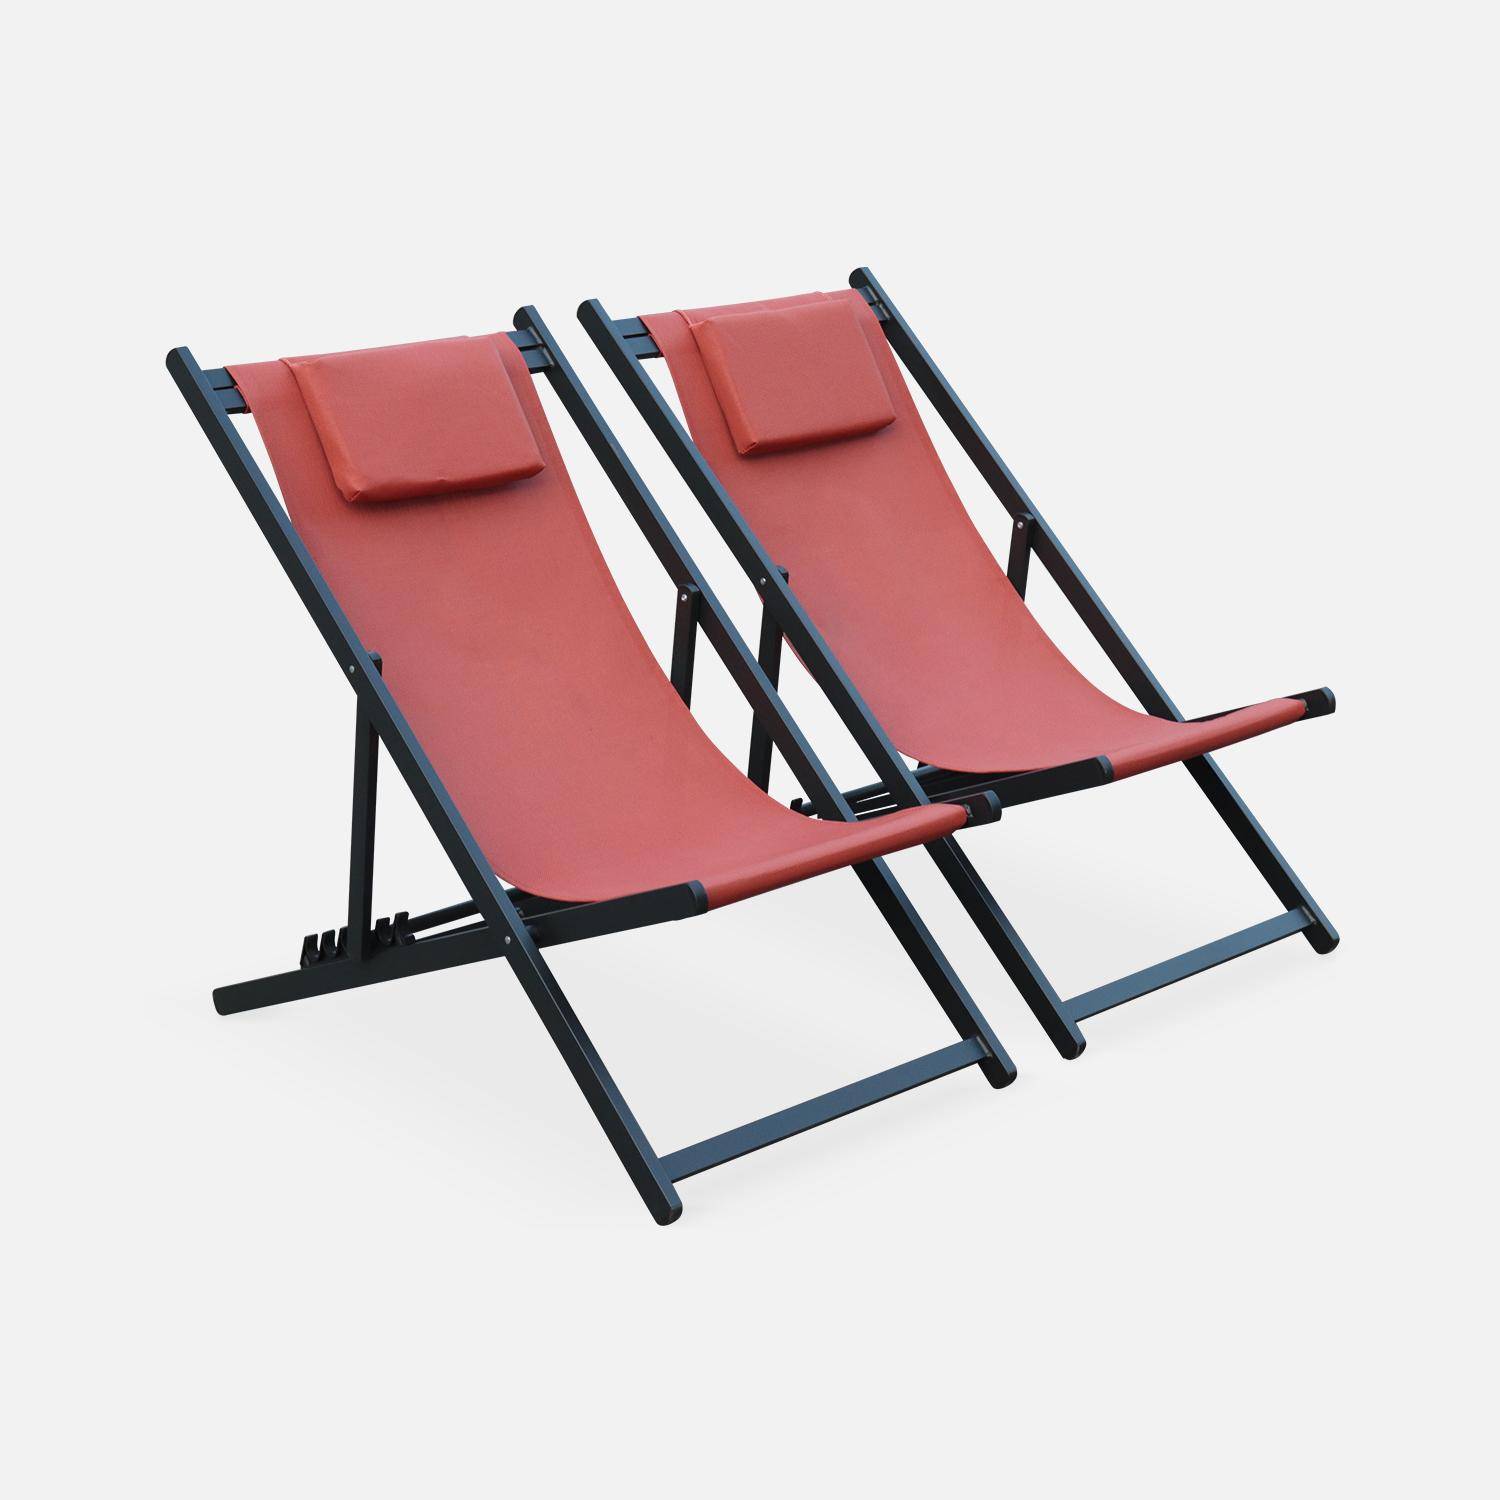 Set of 2 sun loungers - adjustable deck chairs with headrests made from aluminium frame - Gaia - Anthracite frame, Terracotta textilene Photo2